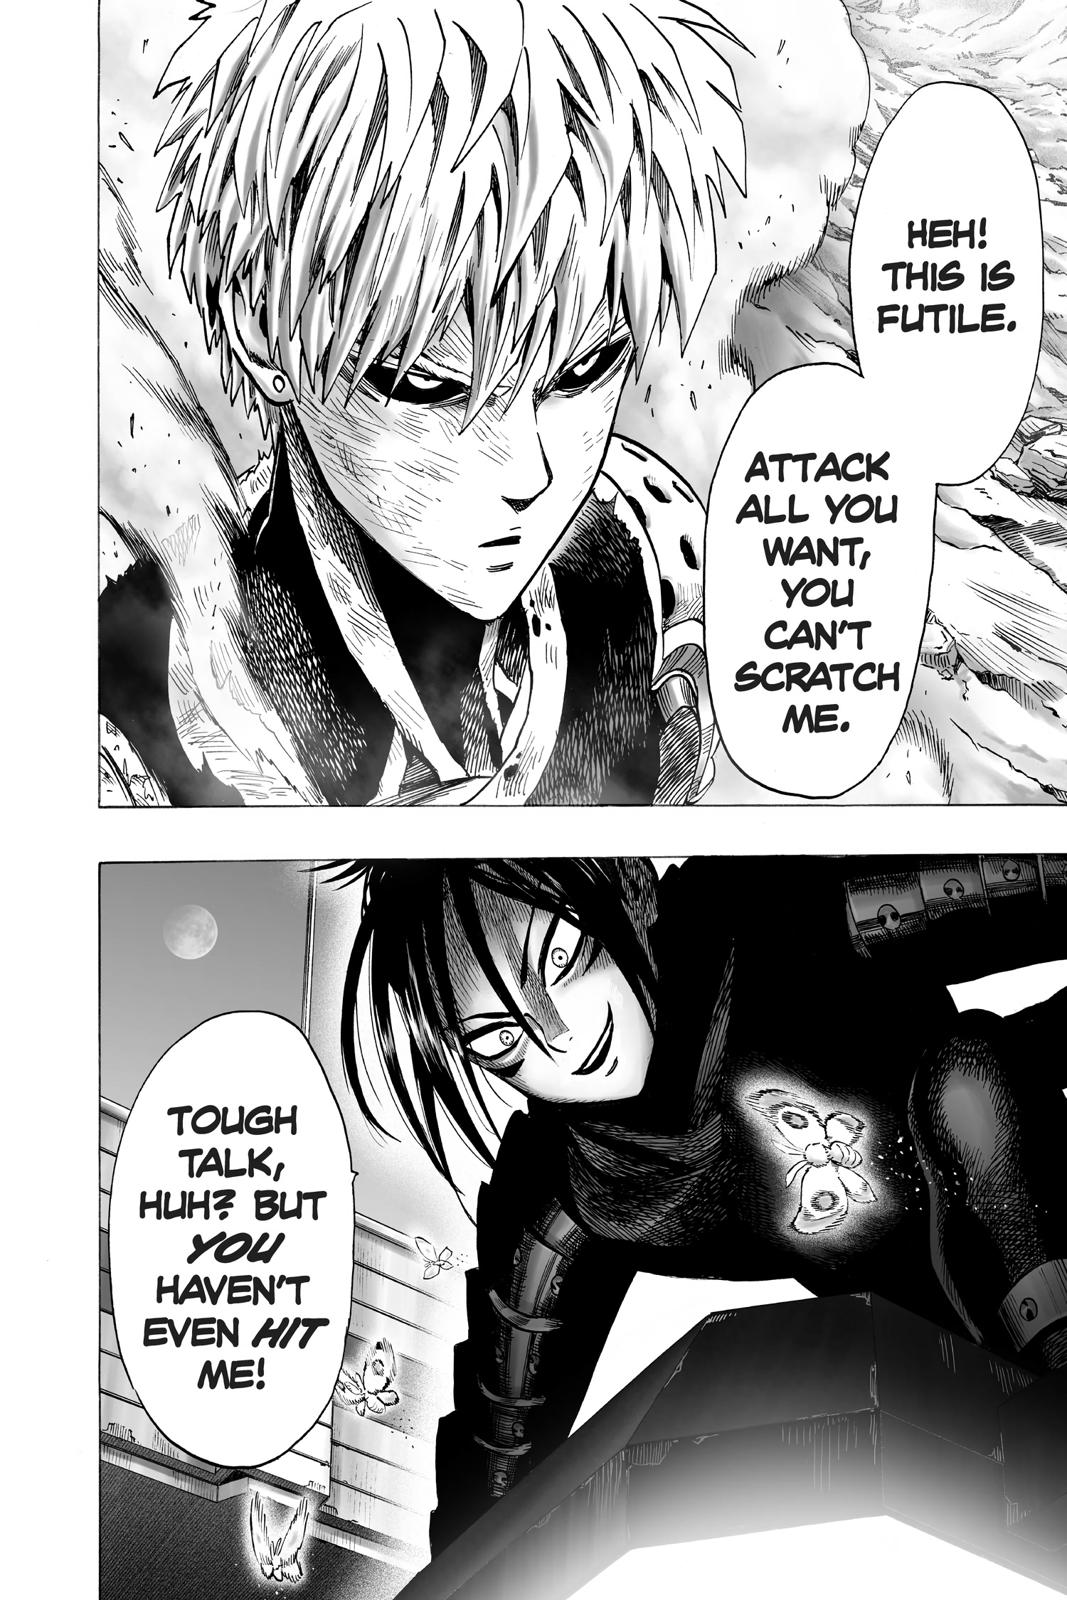 One-Punch Man, Punch 43 image 26